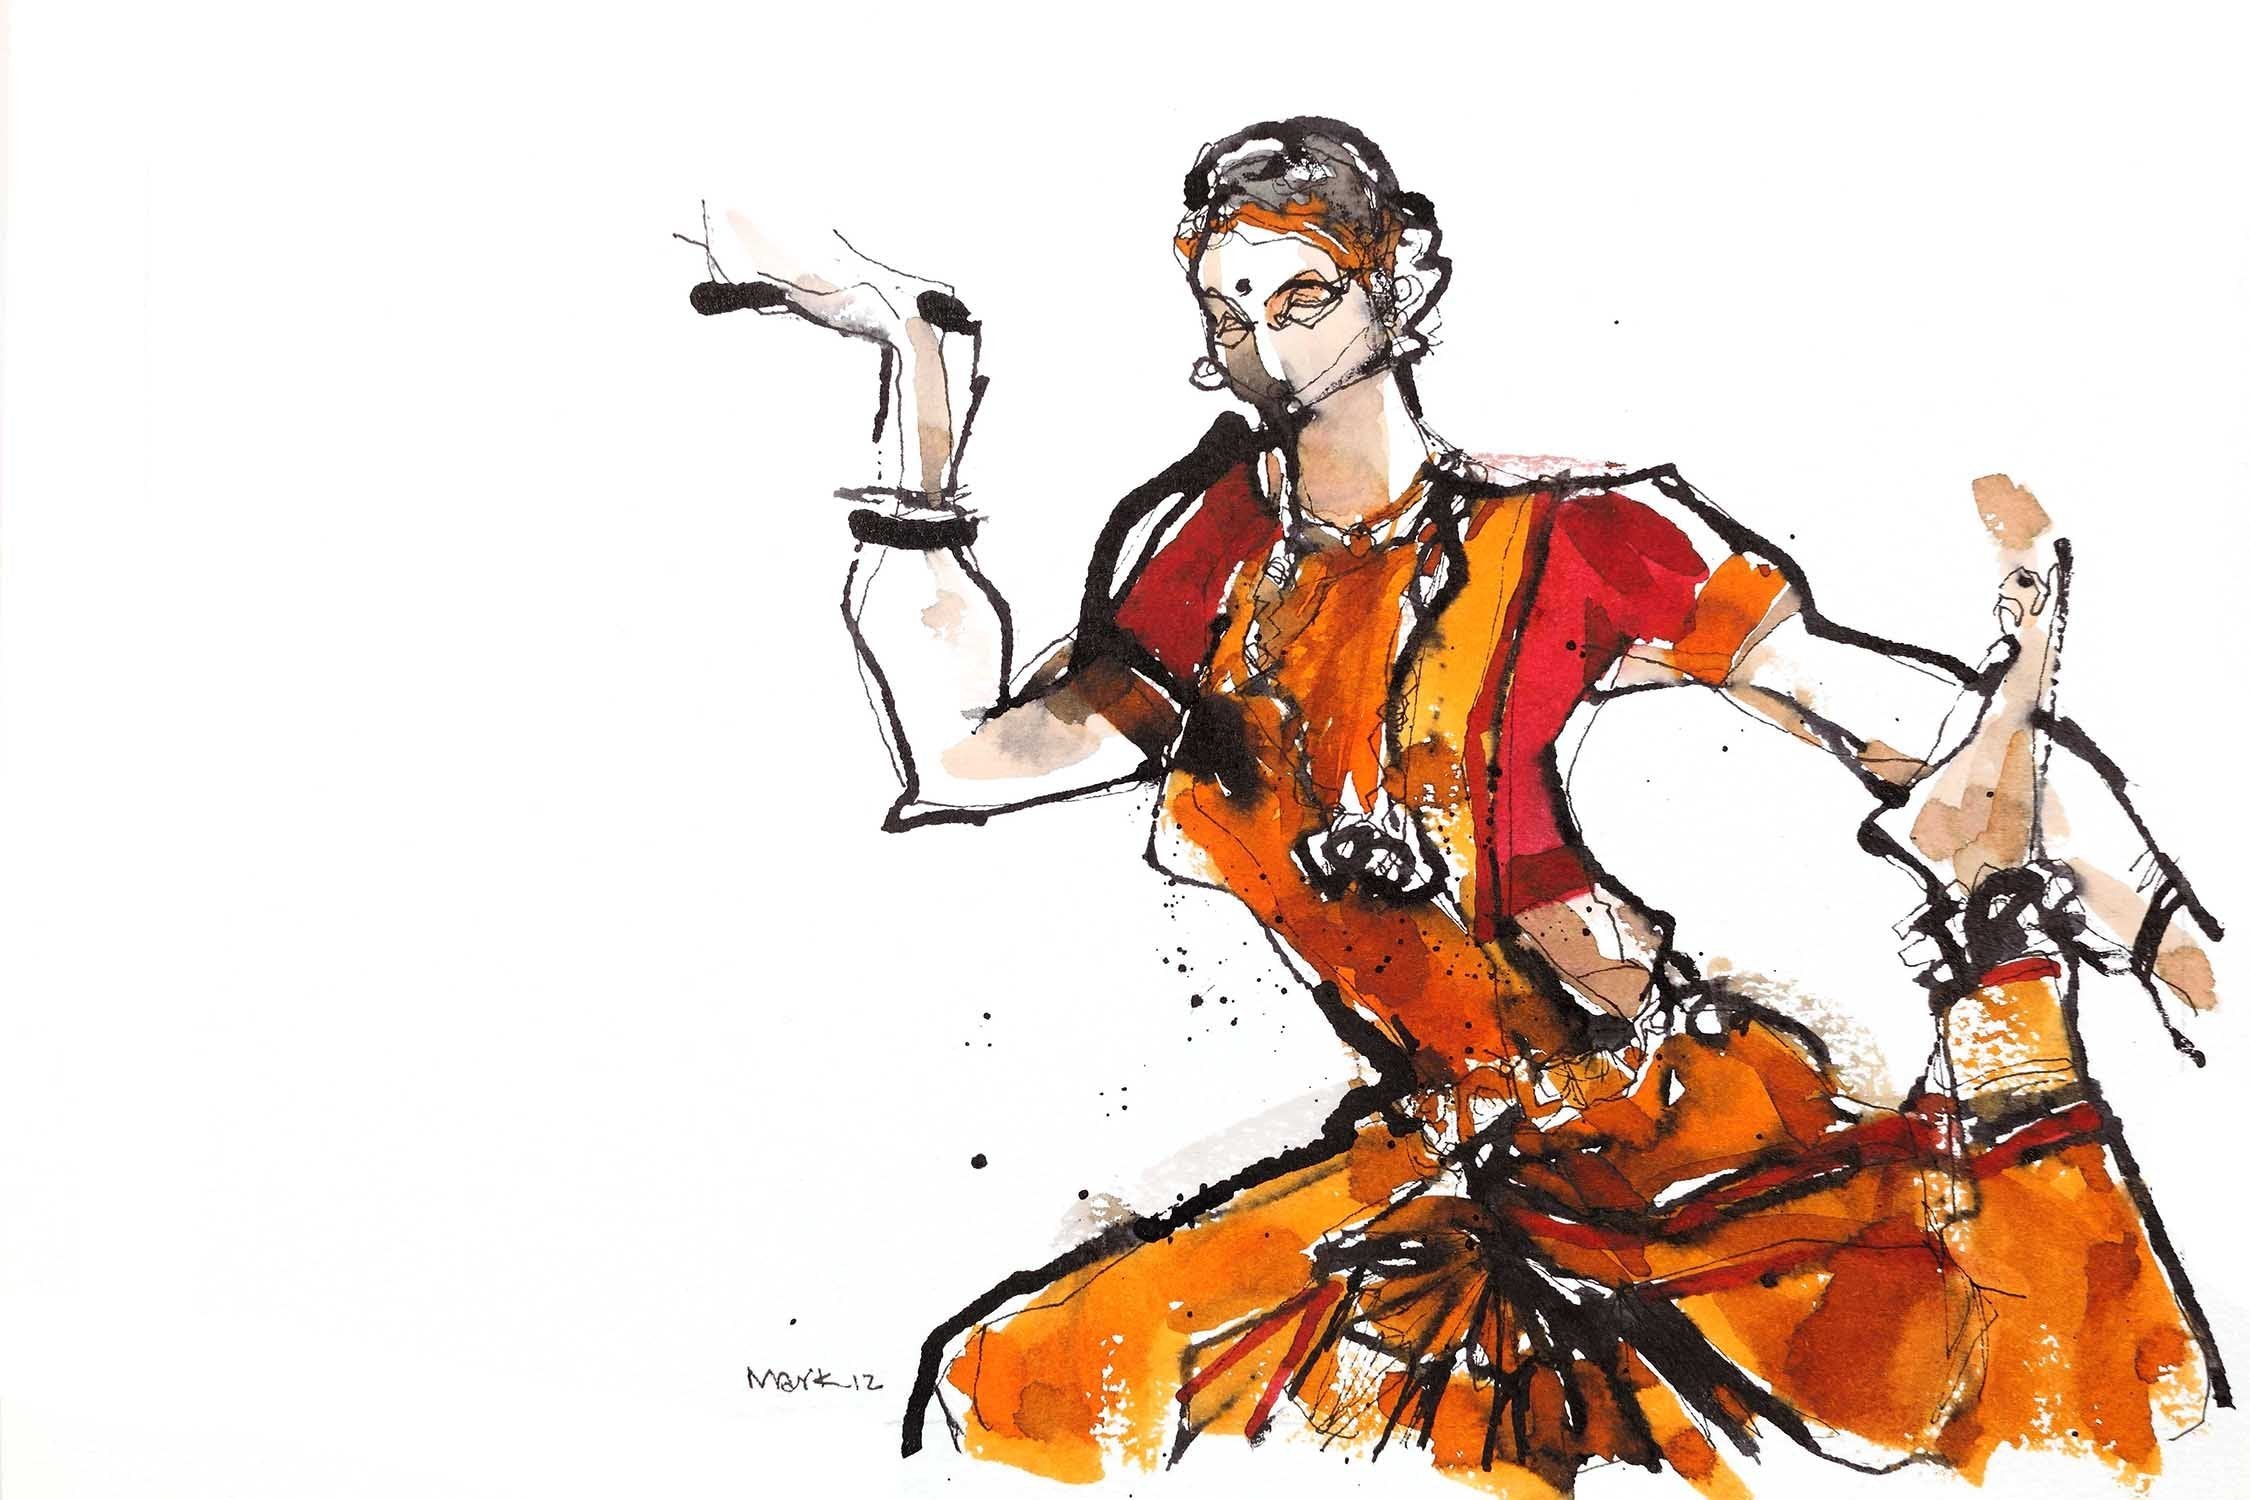 Performer 230|S. Mark Rathinaraj- Pen and Ink on Paper, , 5.5 x 8.5 inches